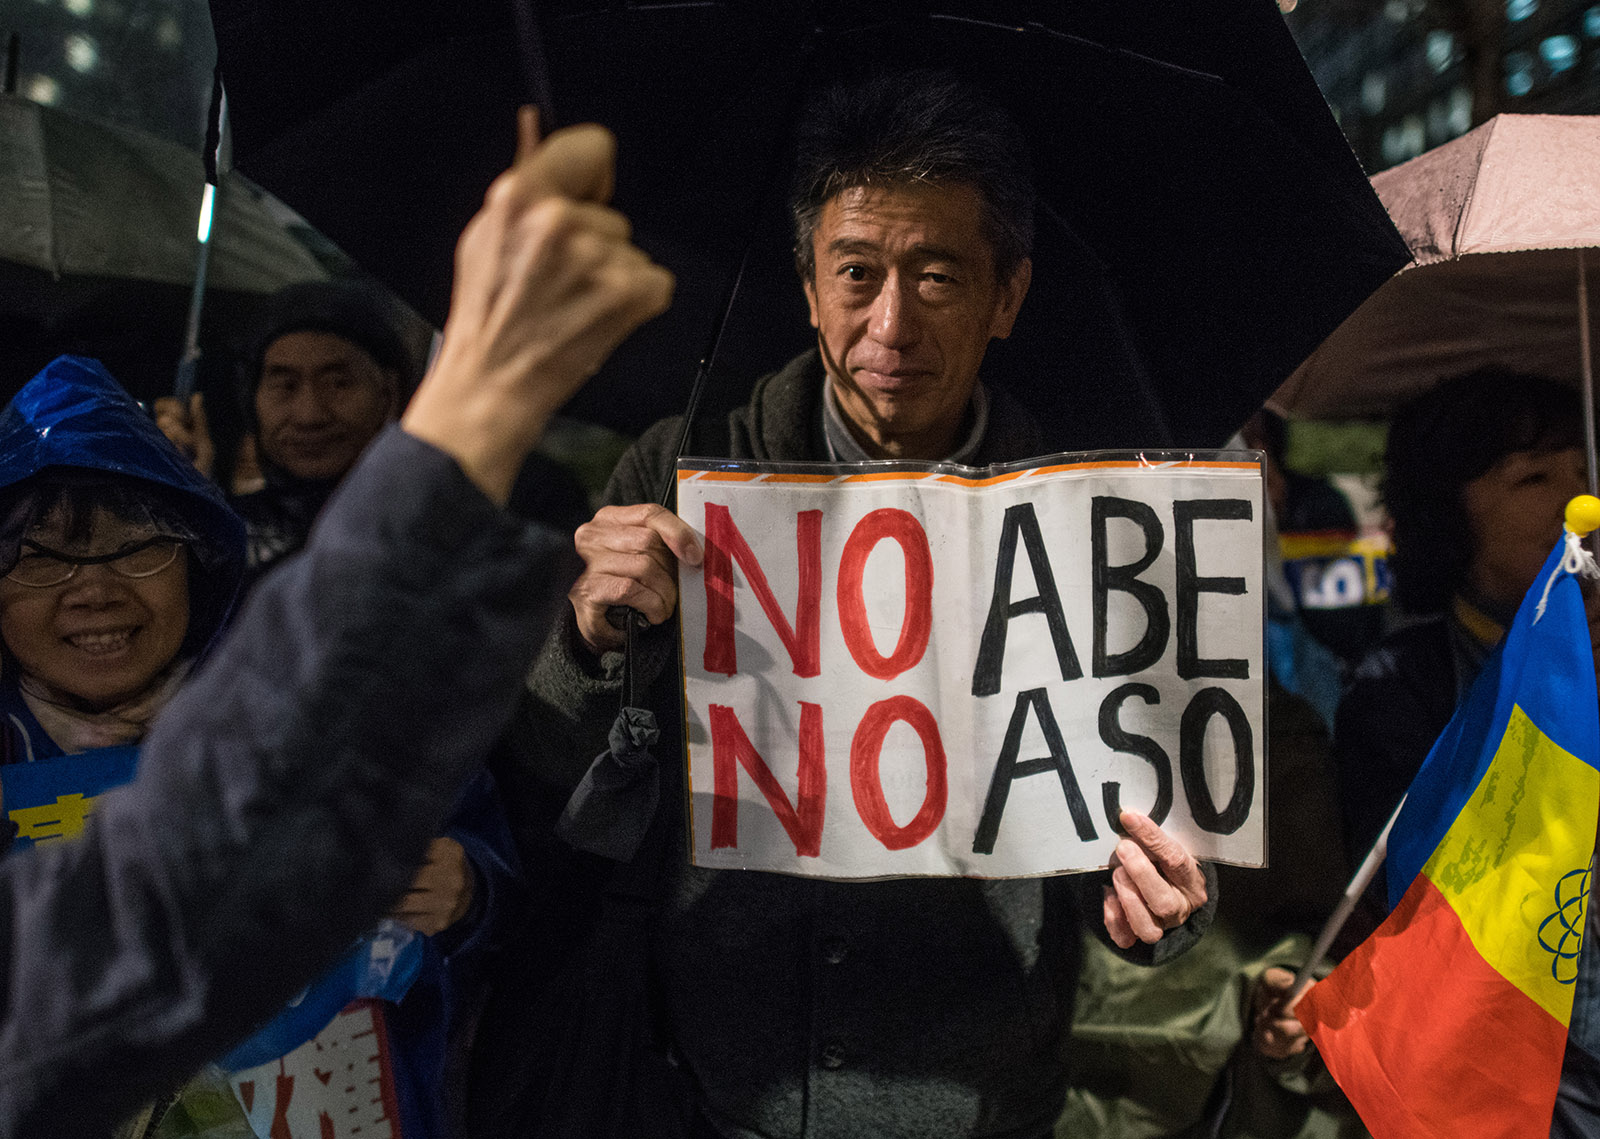 Protesters calling for the resignation of Prime Minister Shinzo Abe and his finance minister, Taro Aso, over a land sale scandal, Tokyo, Japan, March 16, 2018